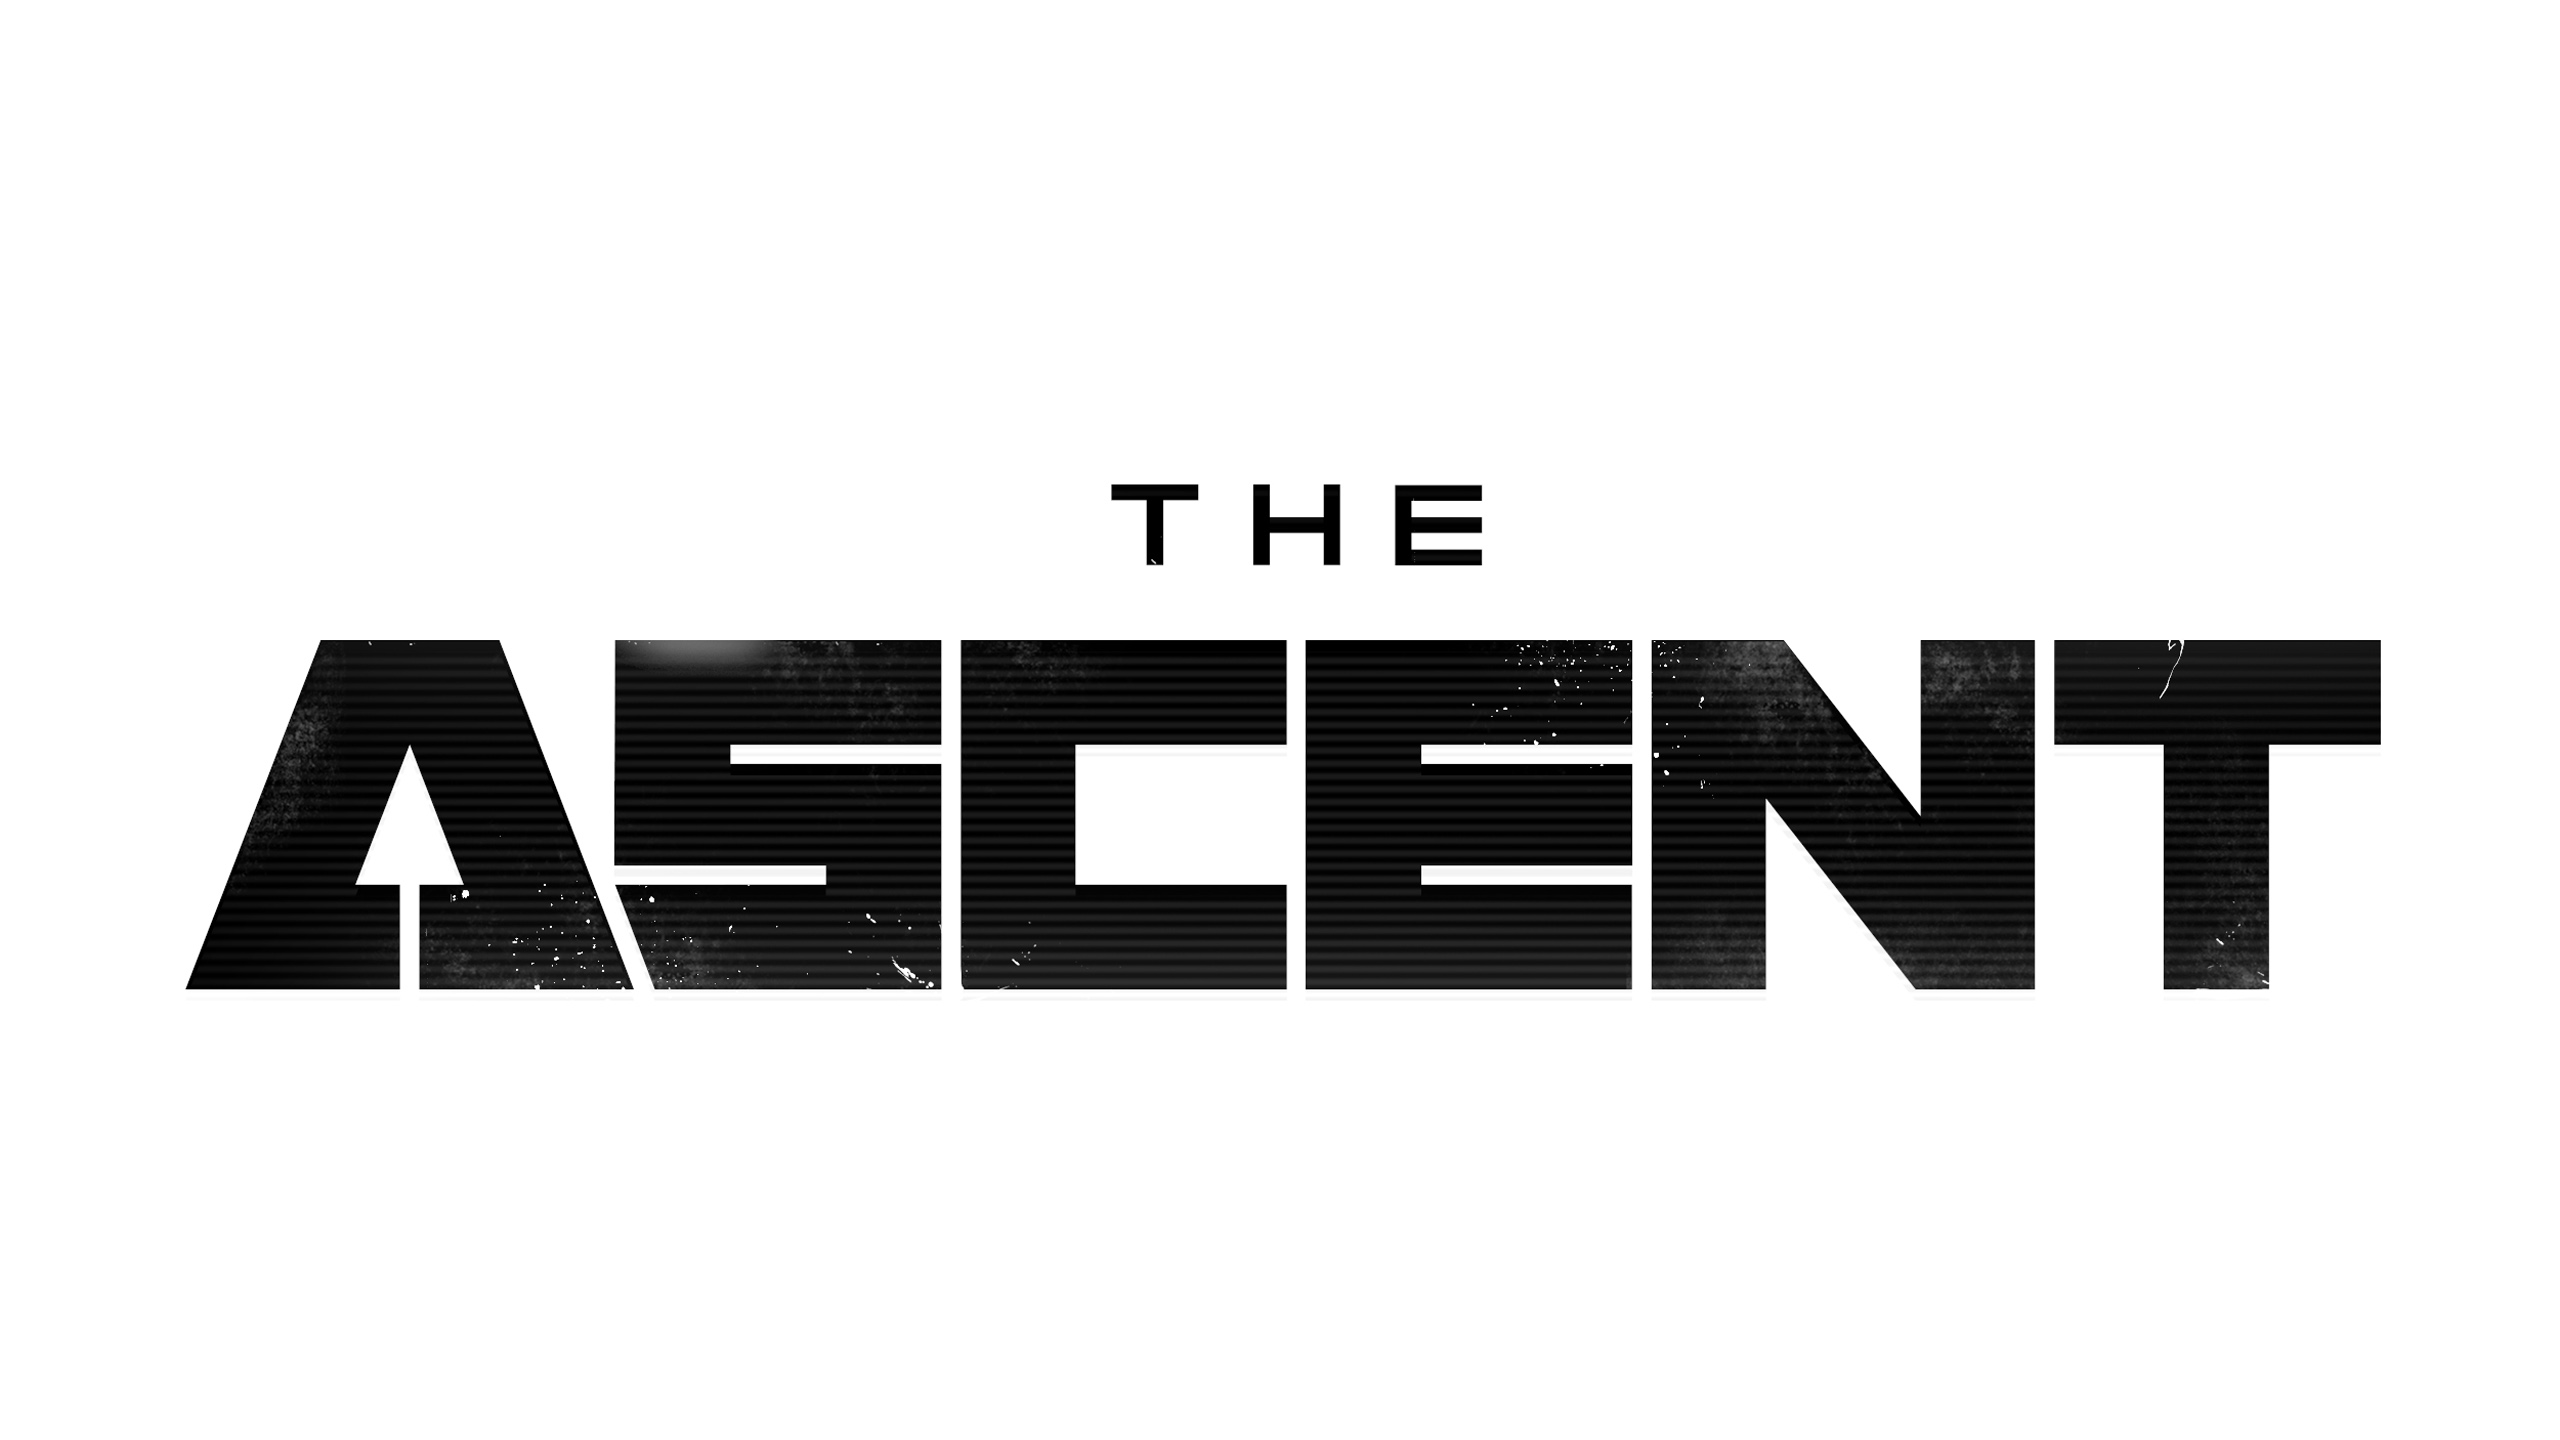 Xbox Series HD The Ascent Wallpaper